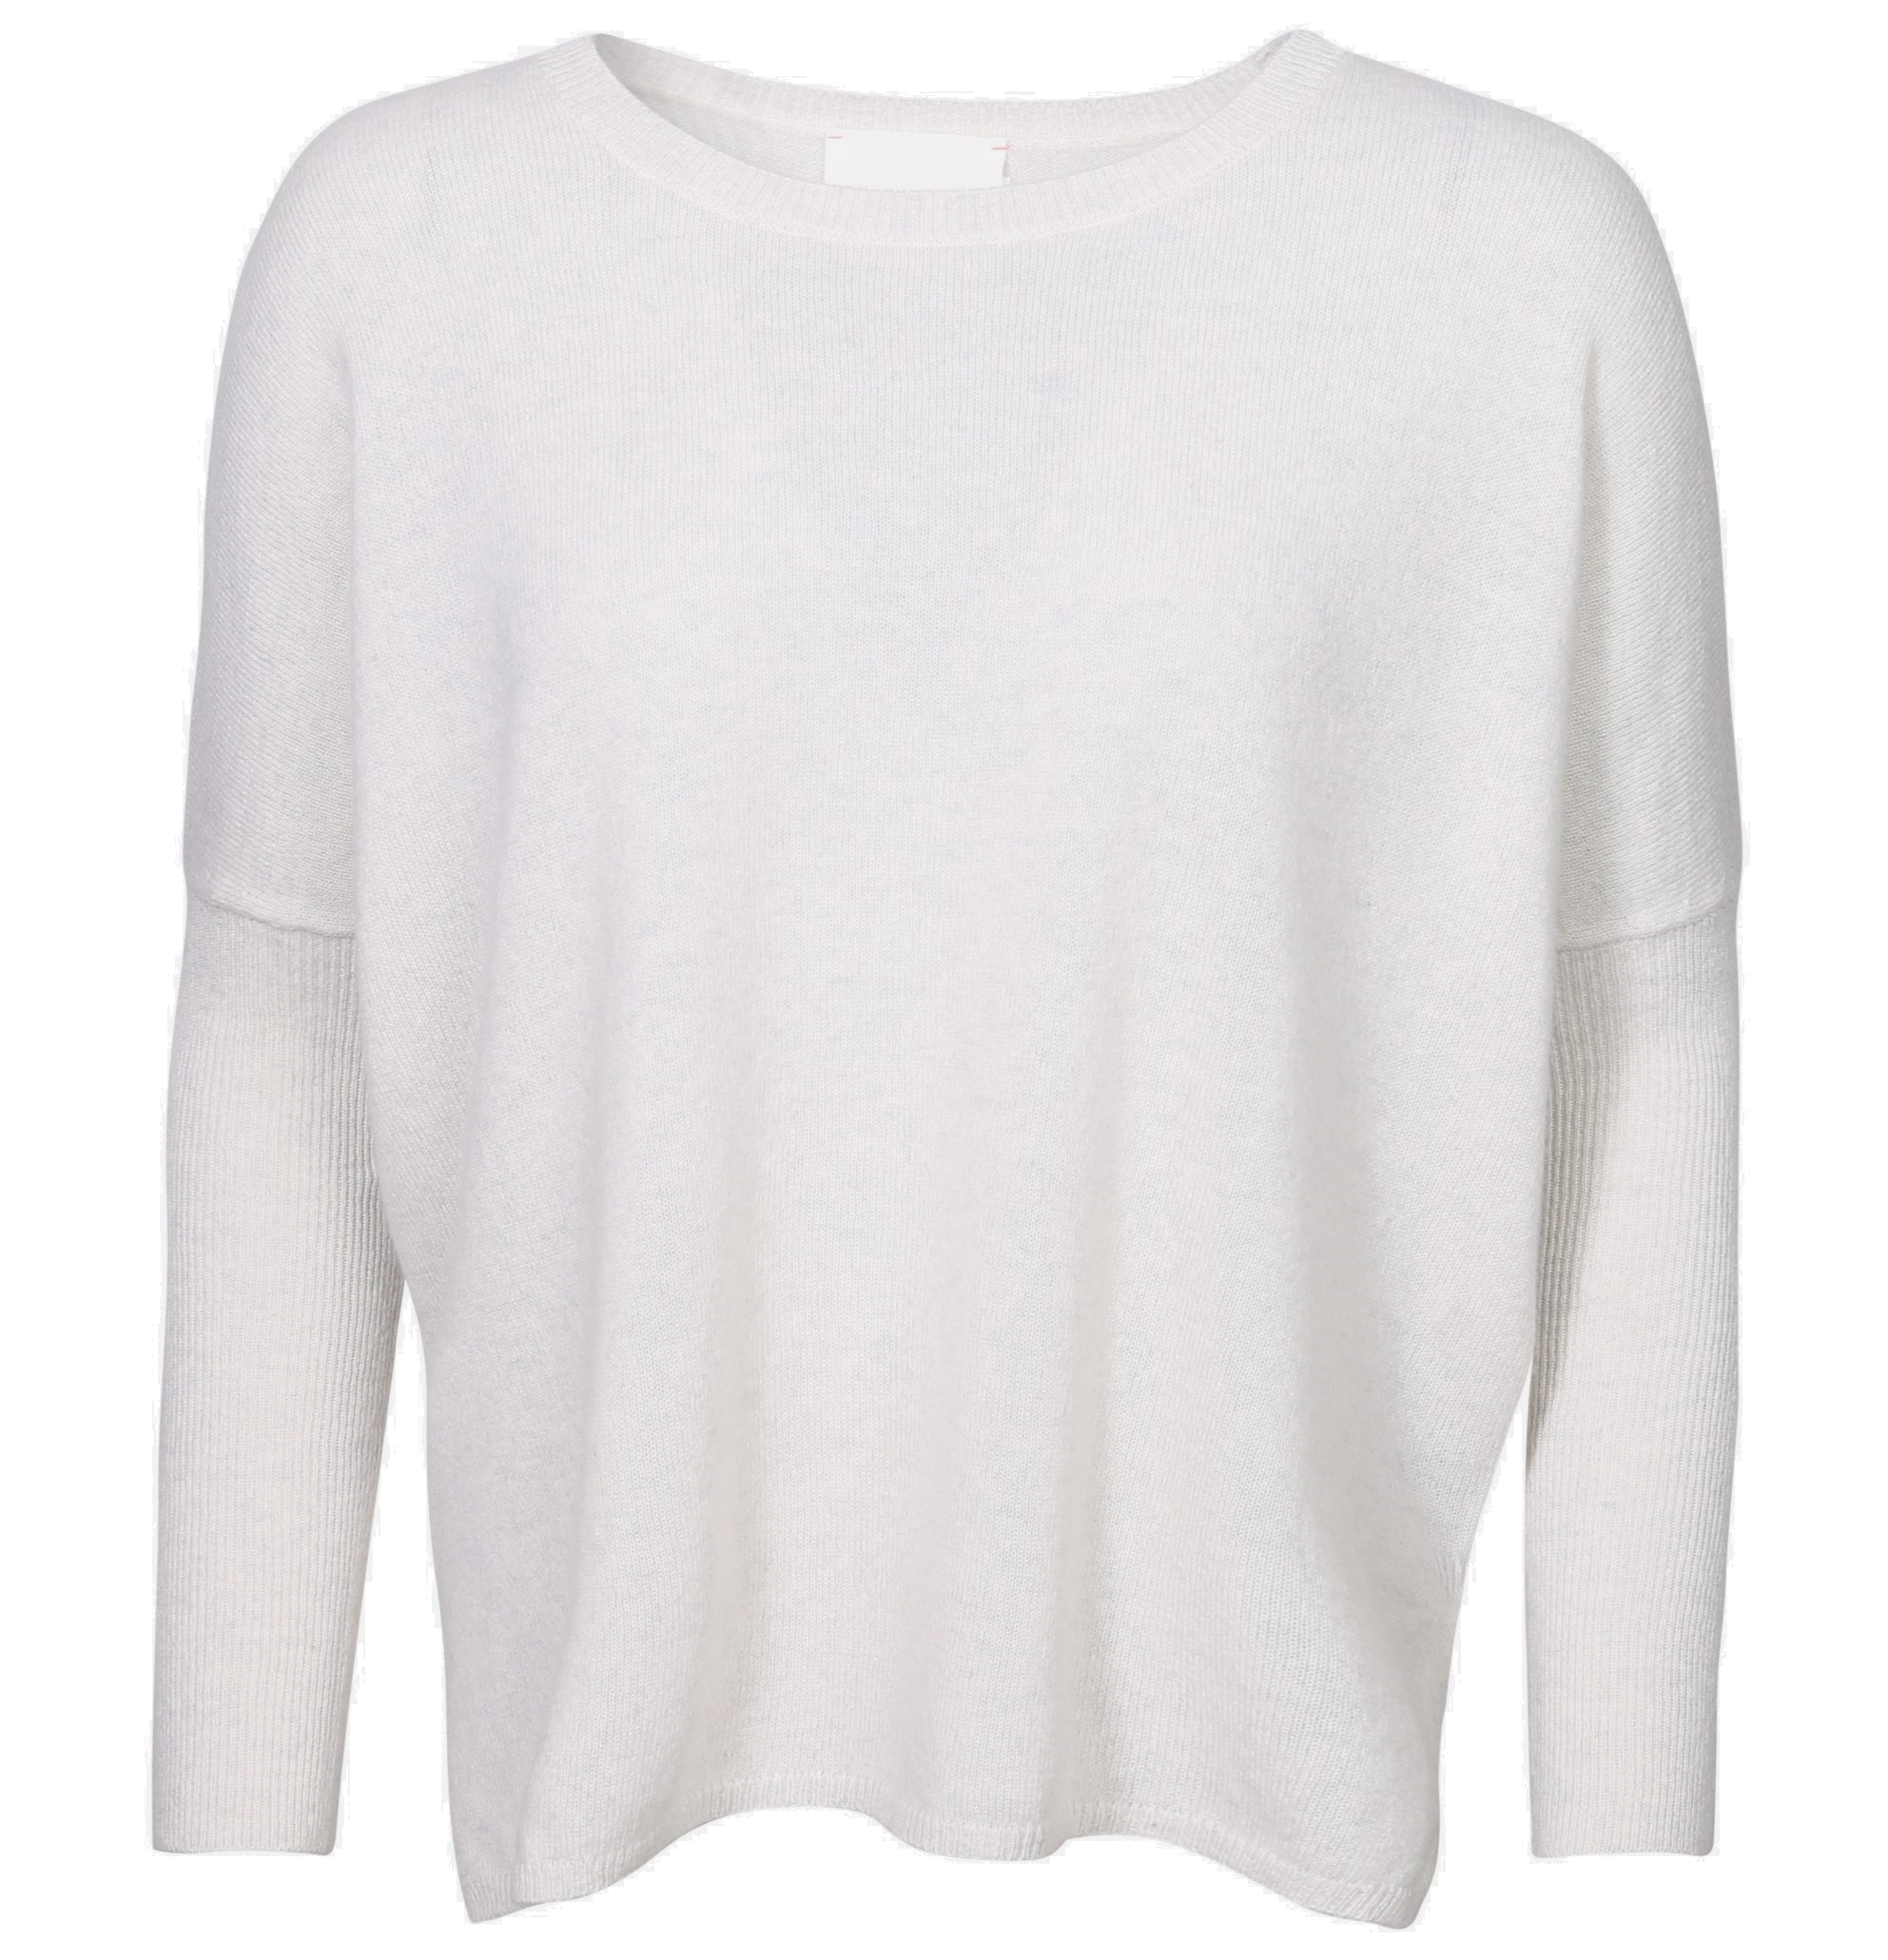 ABSOLUT CASHMERE Poncho Sweater Astrid in Light Grey Melange